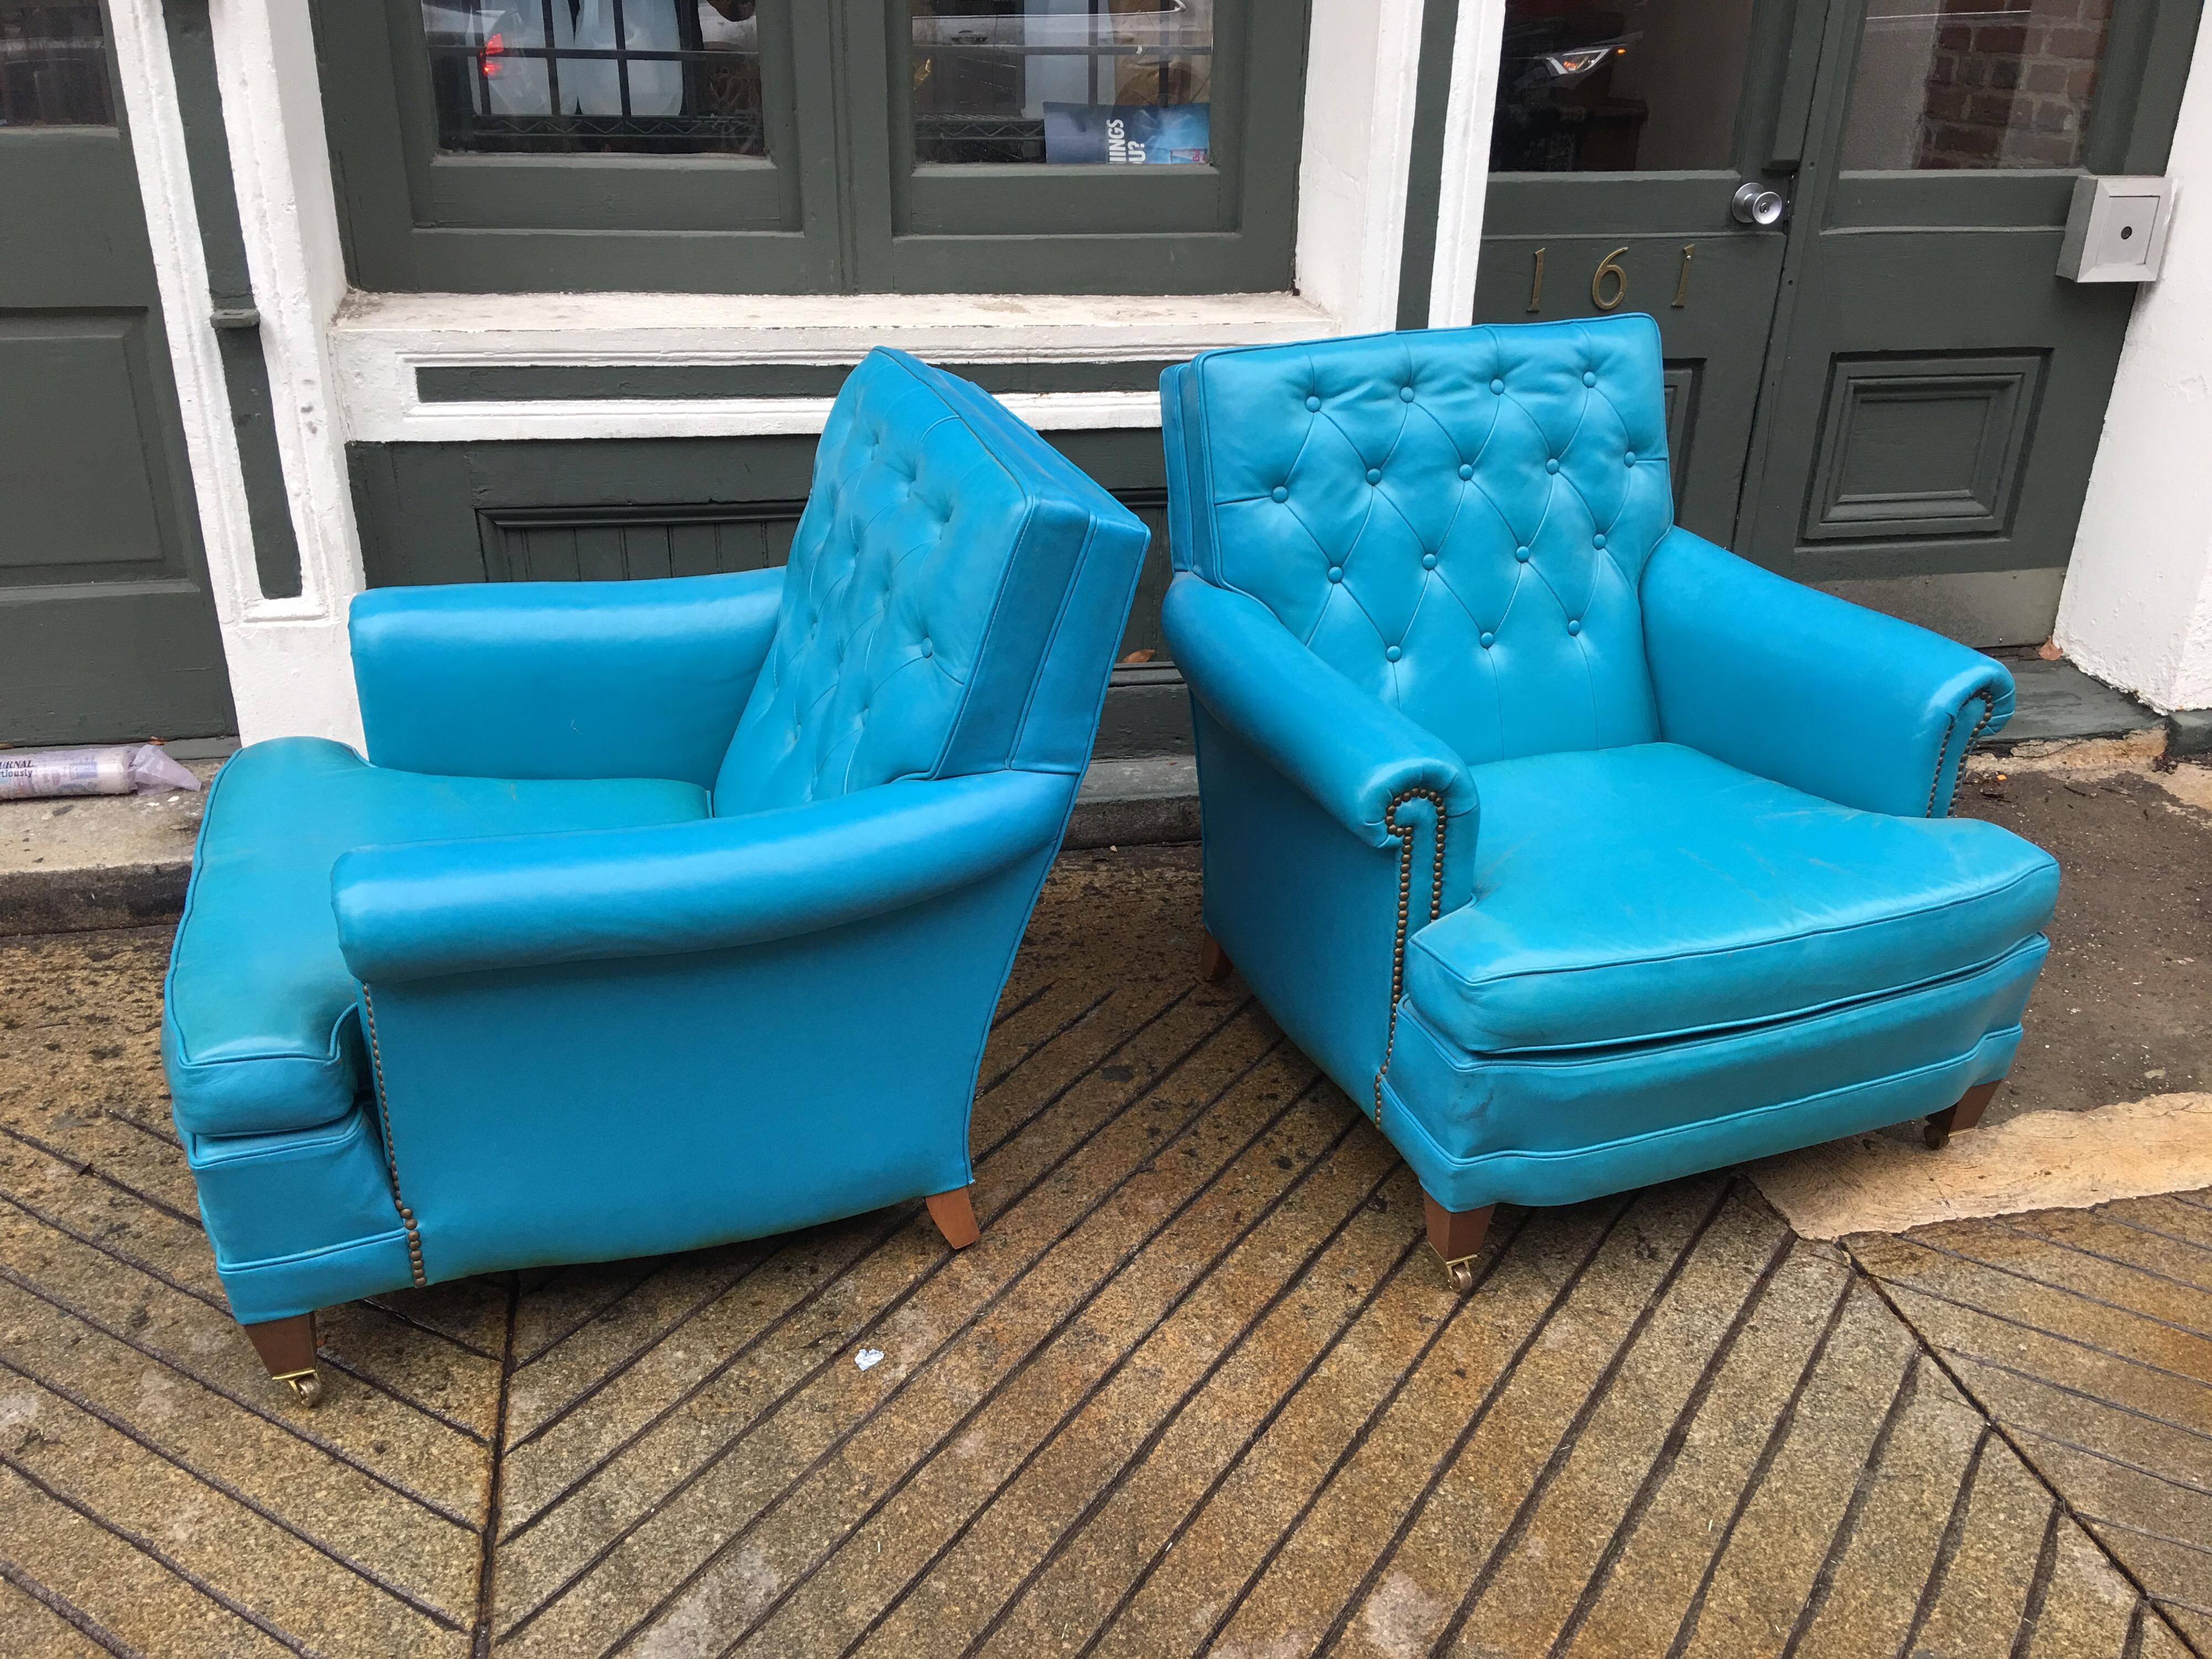 American Pair of Aqua Blue Leather Chesterfield Club Chairs with Ottomans